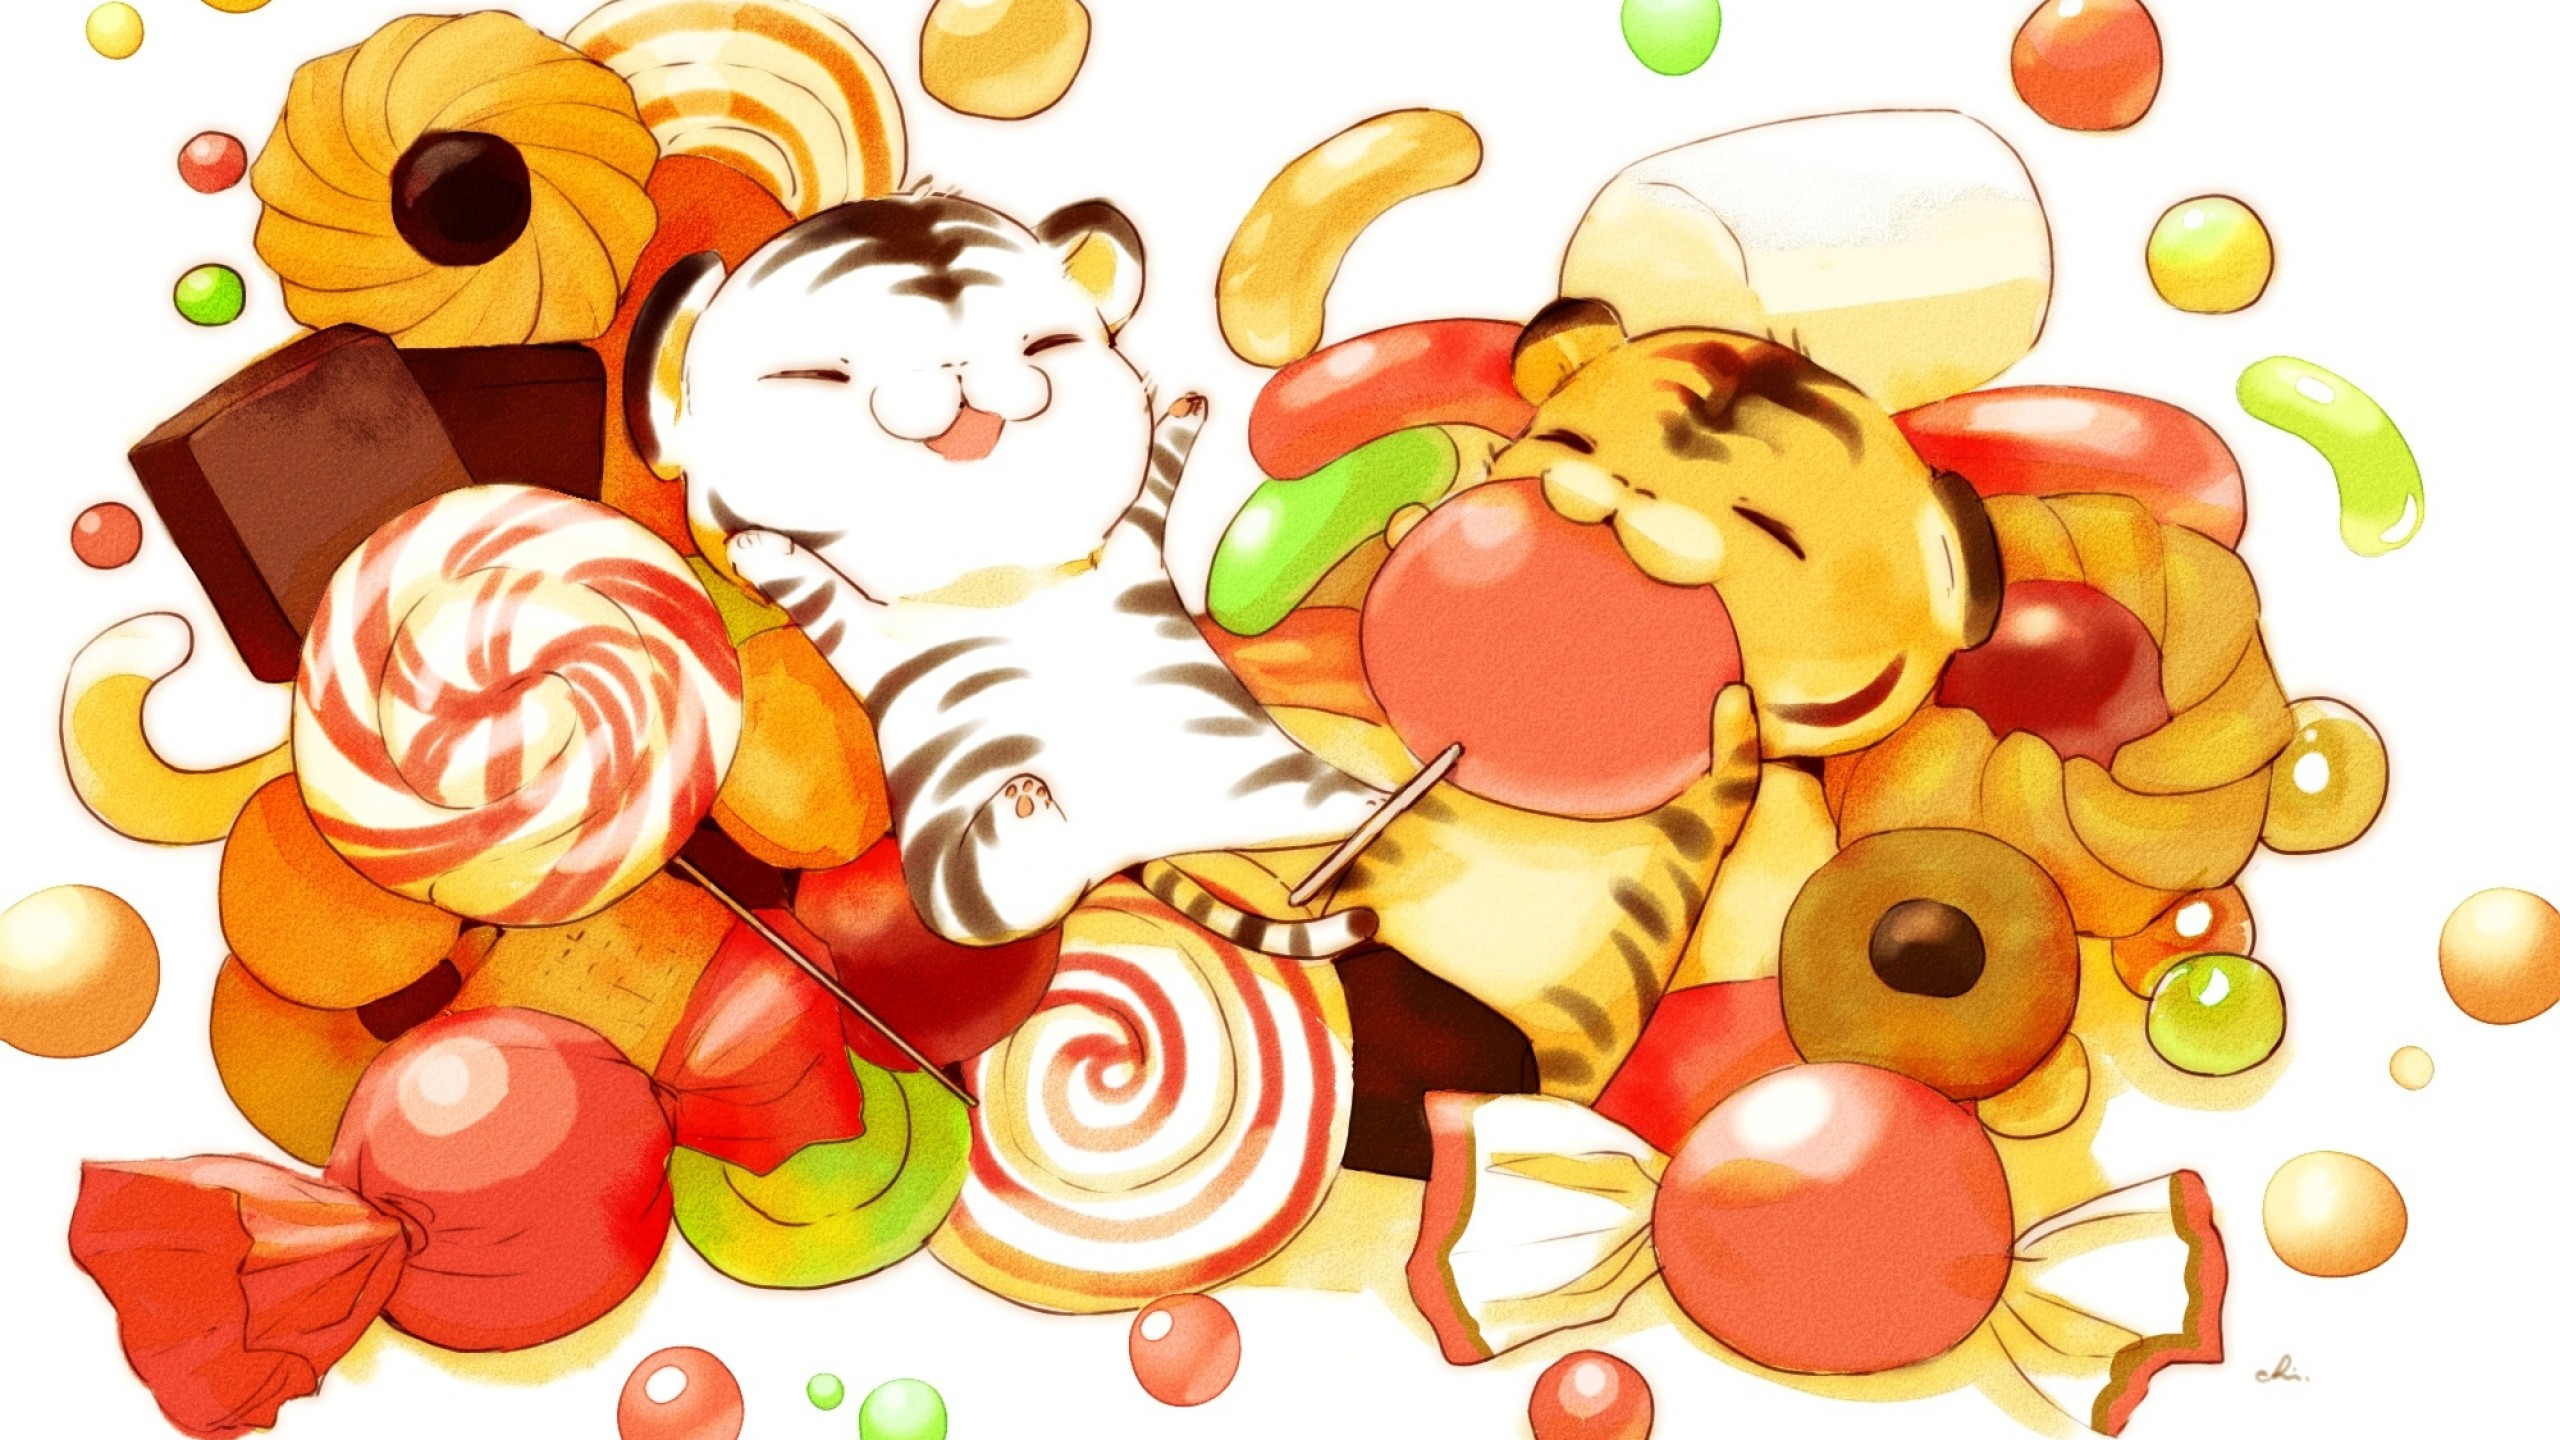 Download 2560x1440 Cute Anime Creatures, Lollipop, Dessert, Candy, Anime Food Wallpaper for iMac 27 inch